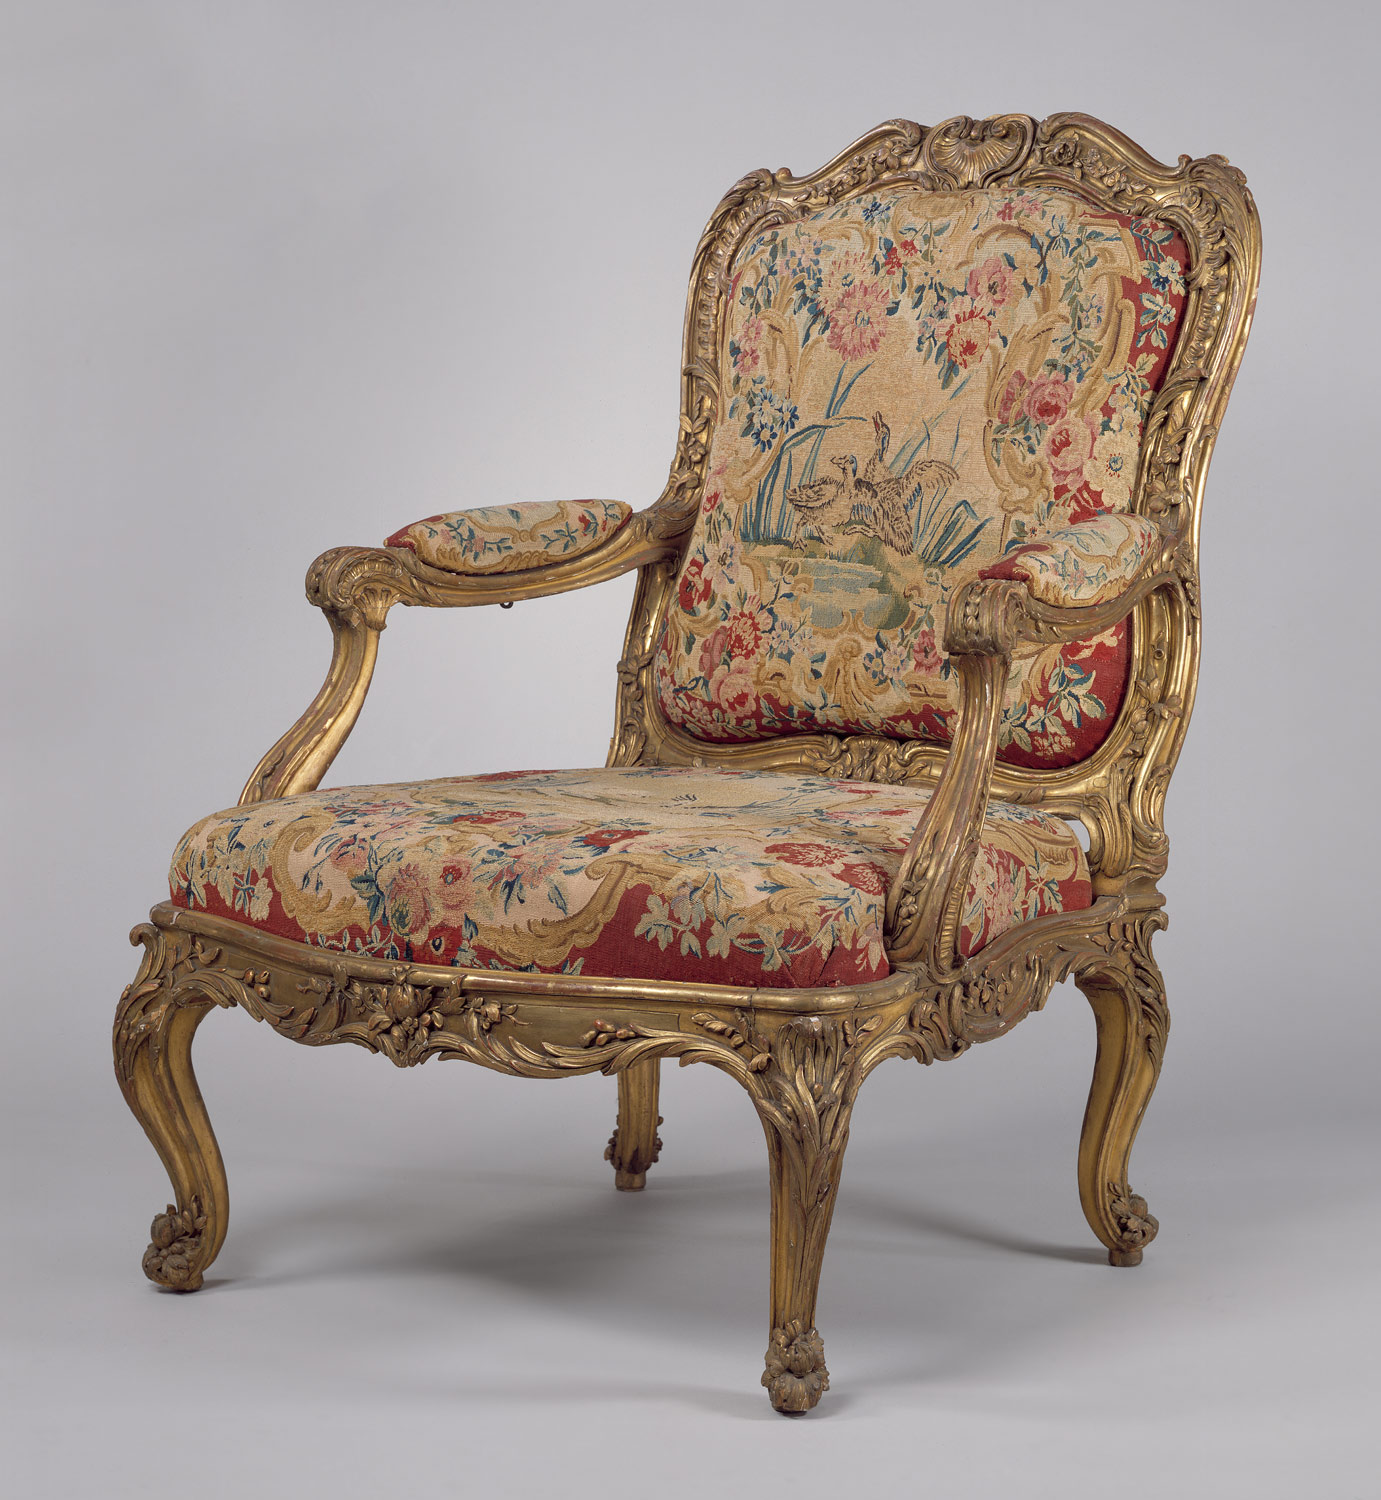 Armchair (fauteuil à la reine) (part of a set), frame by Nicolas-Quinibert Foliot, probably after a design by Pierre Contant d'Ivry, after designs by Jean-Baptiste Oudry, tapestry woven at Beauvais, ca. 1754-56, Paris. 40 7/8 × 29 × 26 in. Carved and gilded beech; wool and silk tapestry. Photo: Metropolitan Museum of Art, New York (66.60.2). 